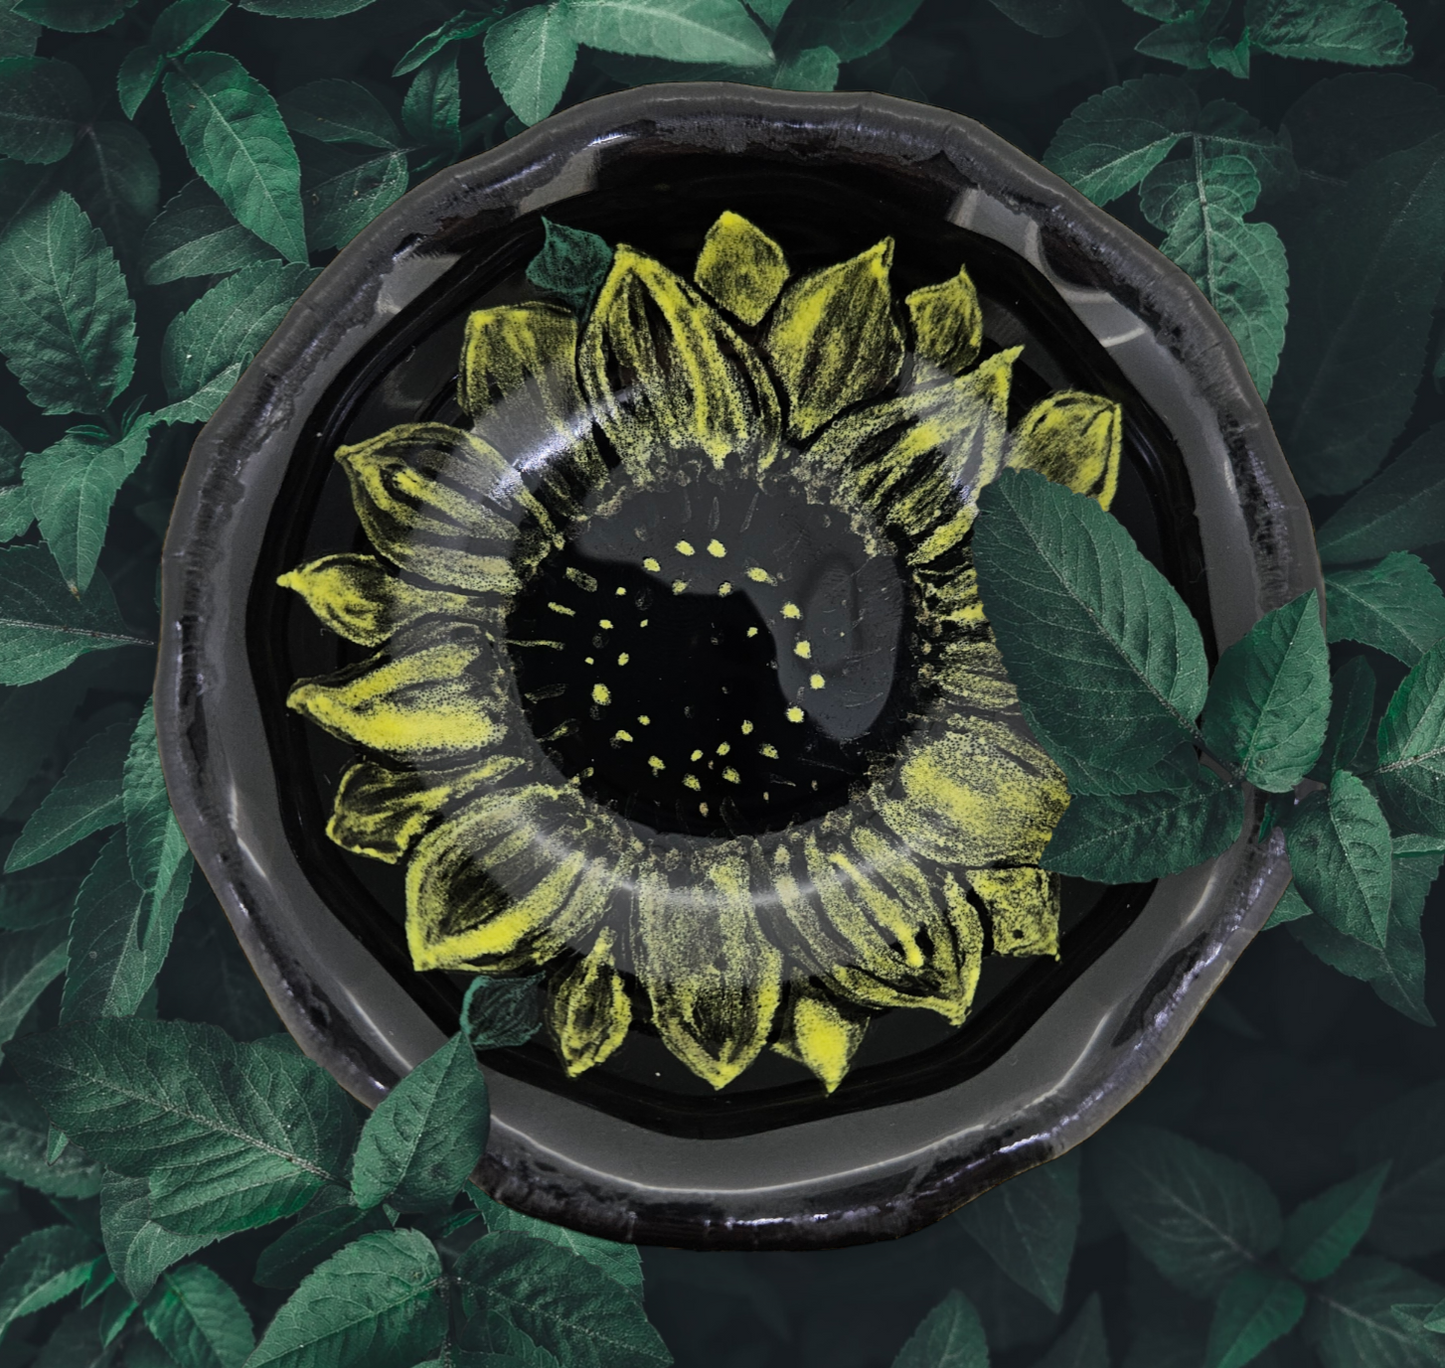 Hand Painted Sunflower Fused Glass Dish